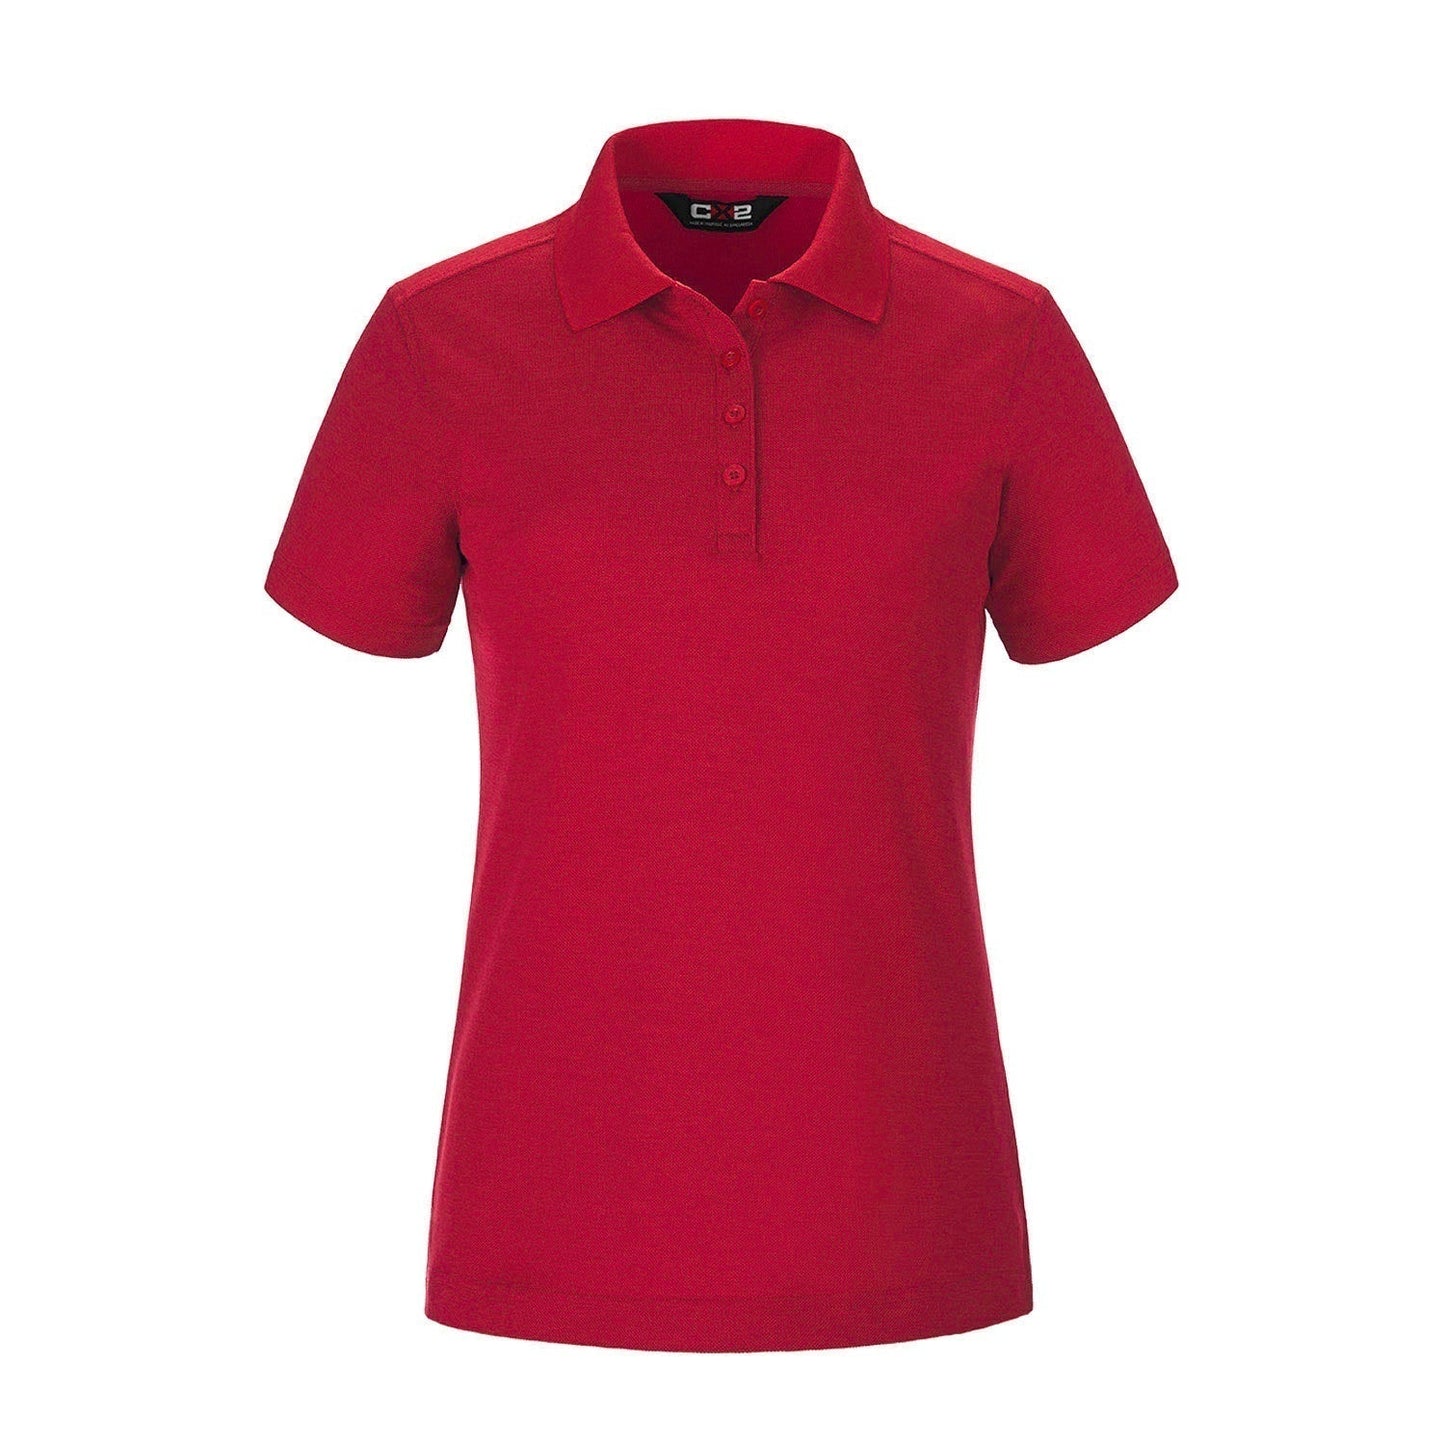 S05736 - Ace Ladies Pique Mesh Polo Red / XS Polos